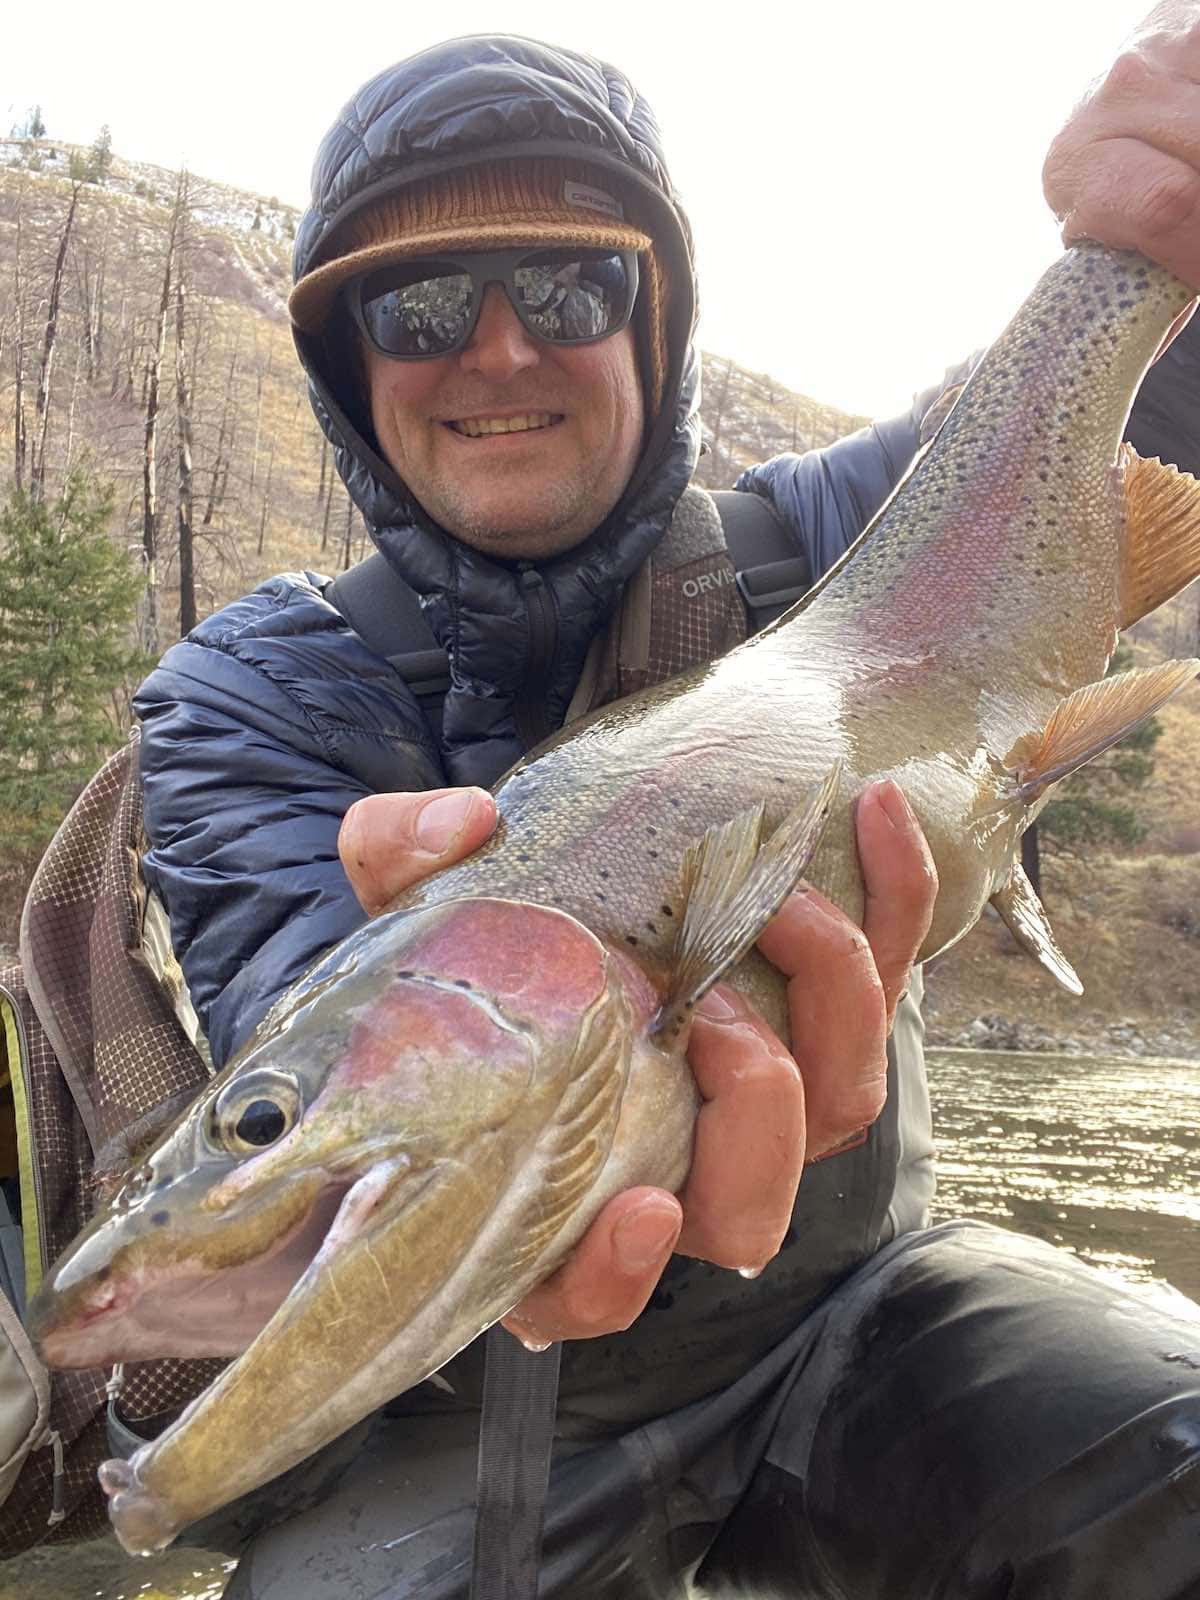 Fly fishing for rainbow trout on a river